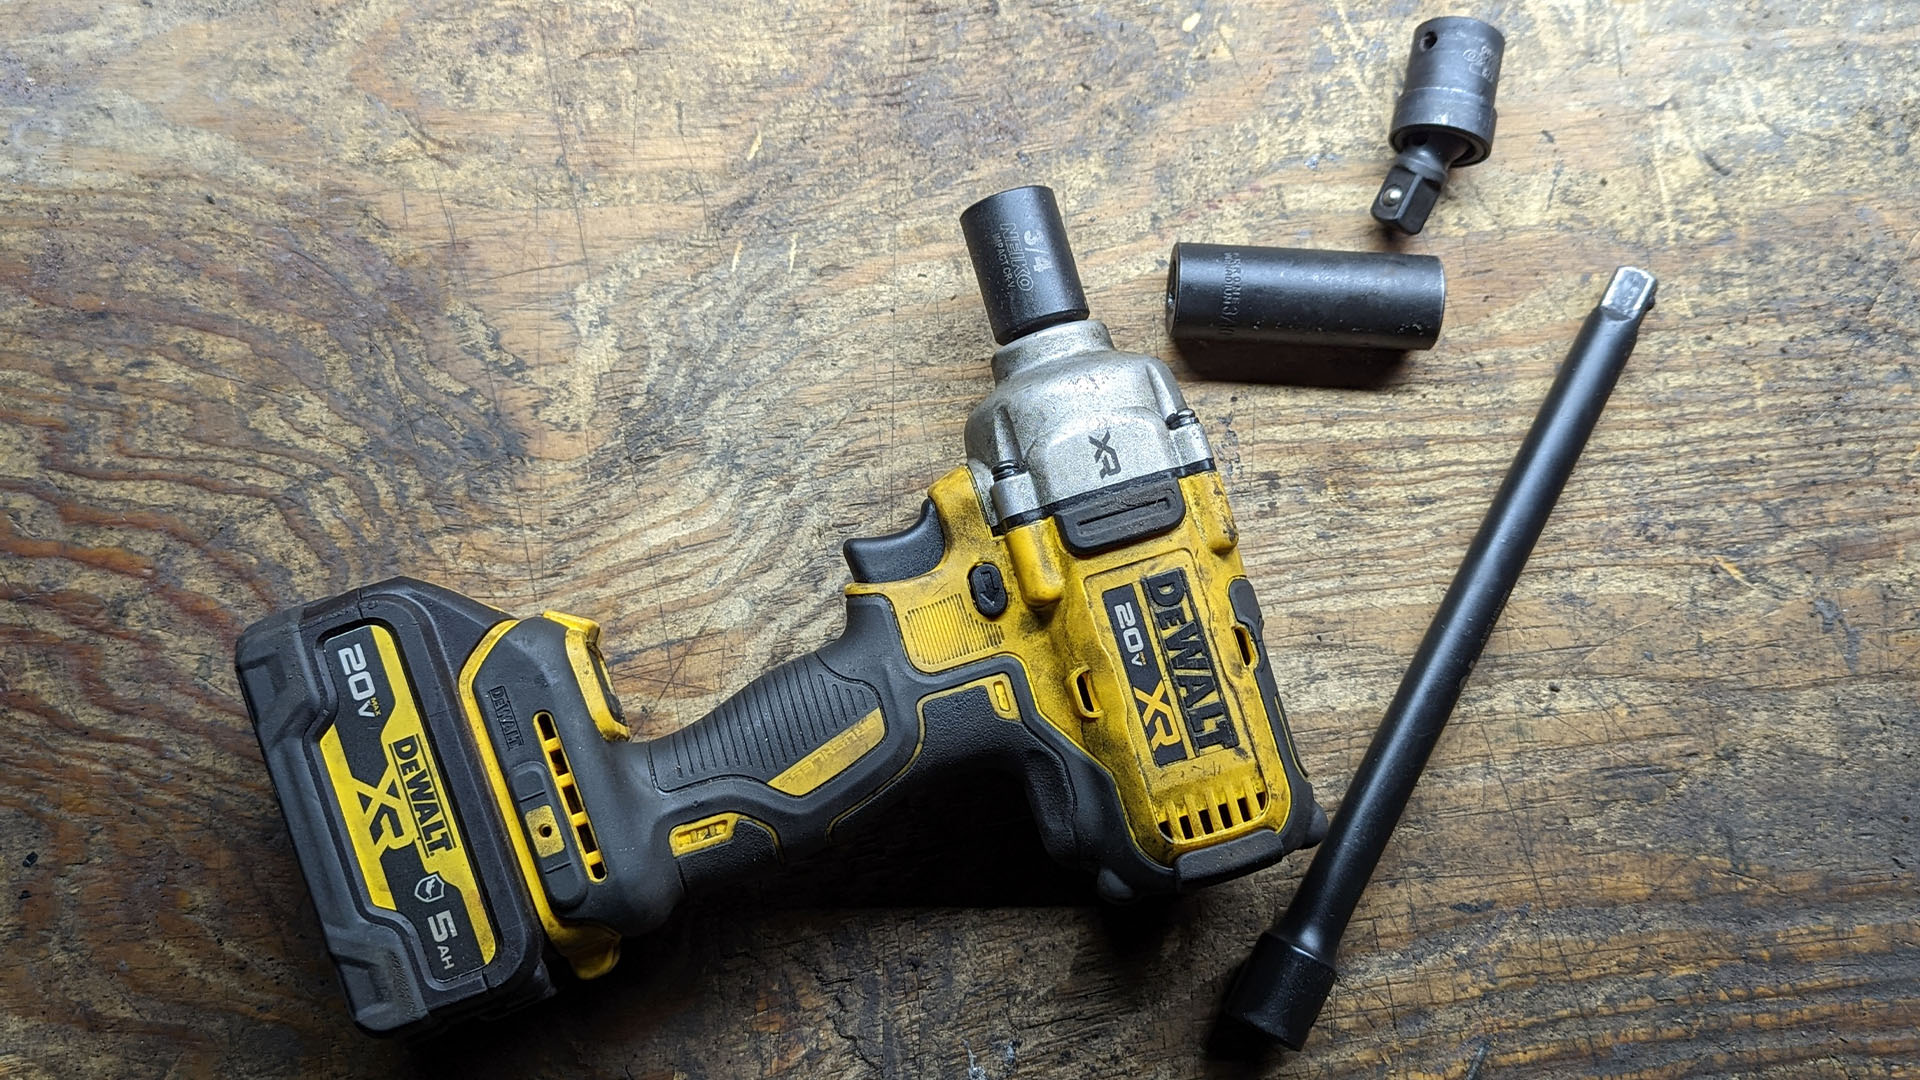 Ryobi 18V One+ HP Compact Brushless 3/8-Inch Right Angle Drill Review